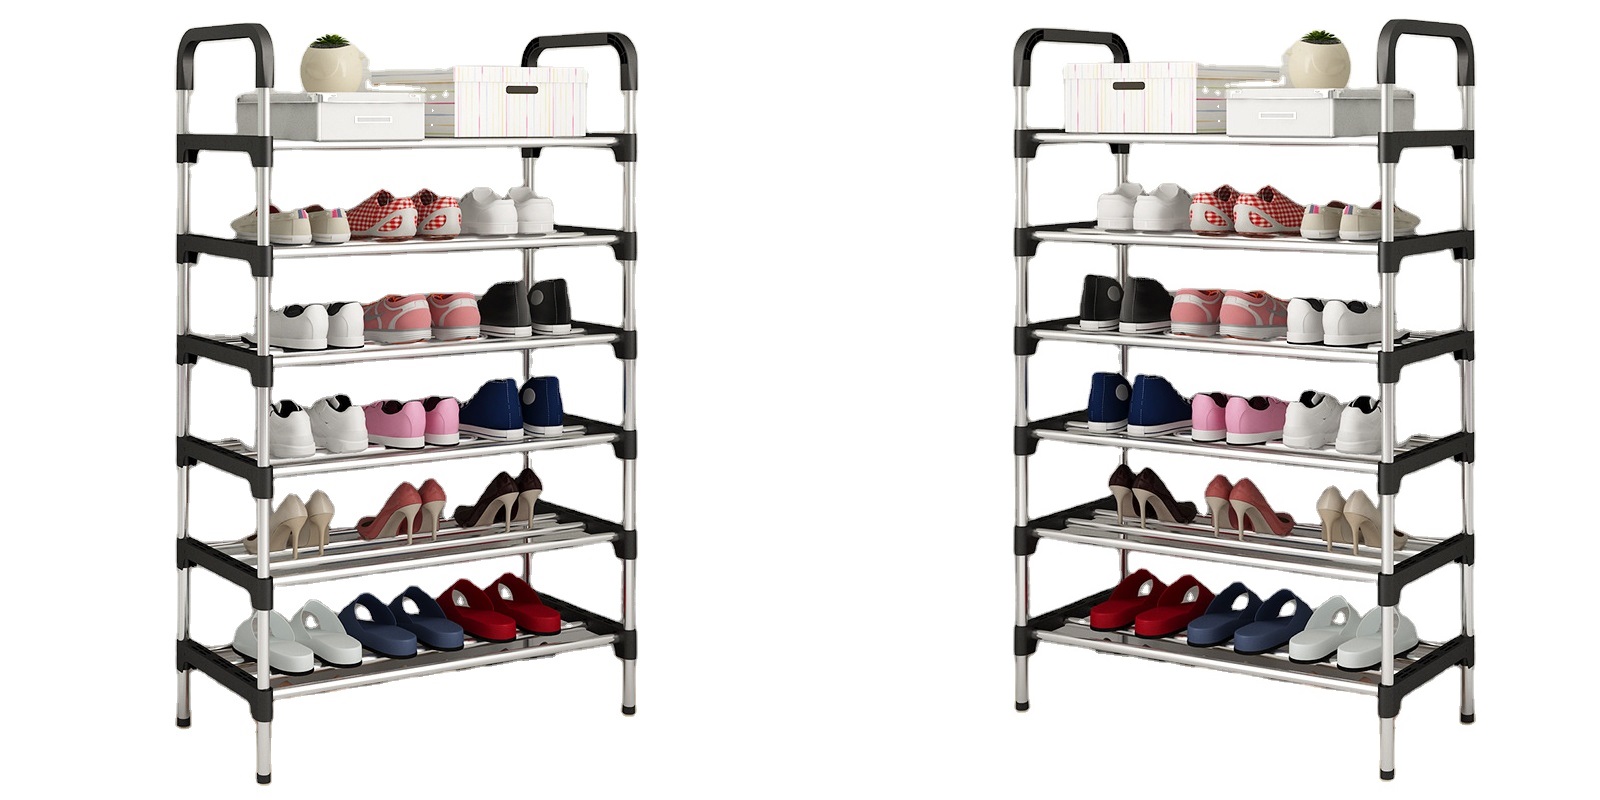 An Illustration Of Shoes Rack On Alibaba